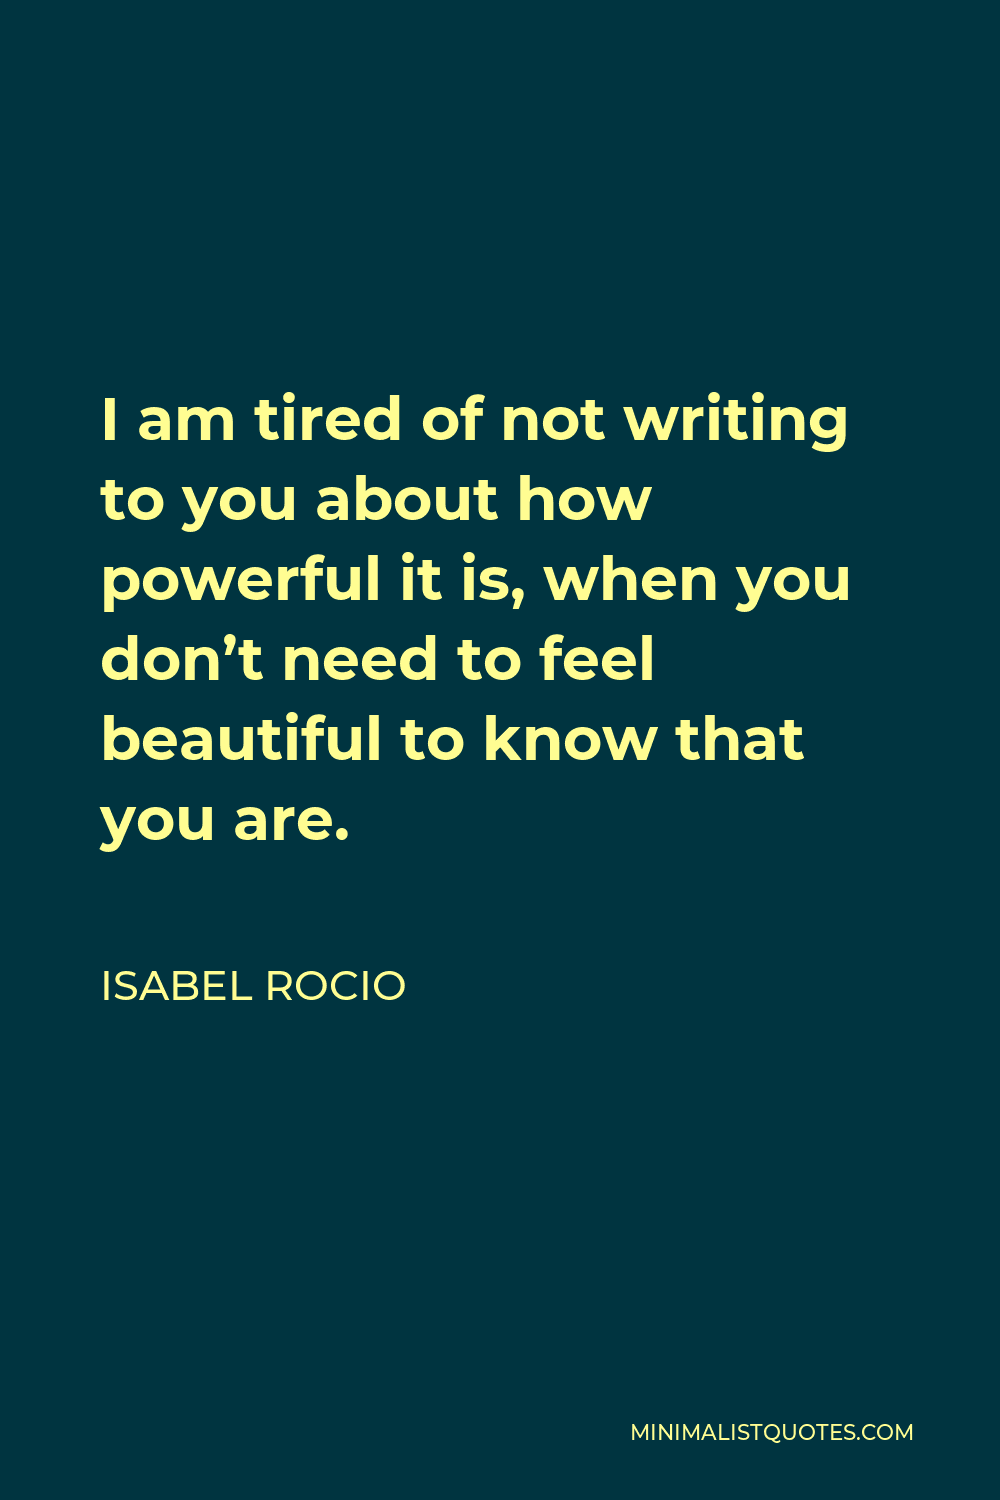 Isabel Rocio Quote - I am tired of not writing to you about how powerful it is, when you don’t need to feel beautiful to know that you are.